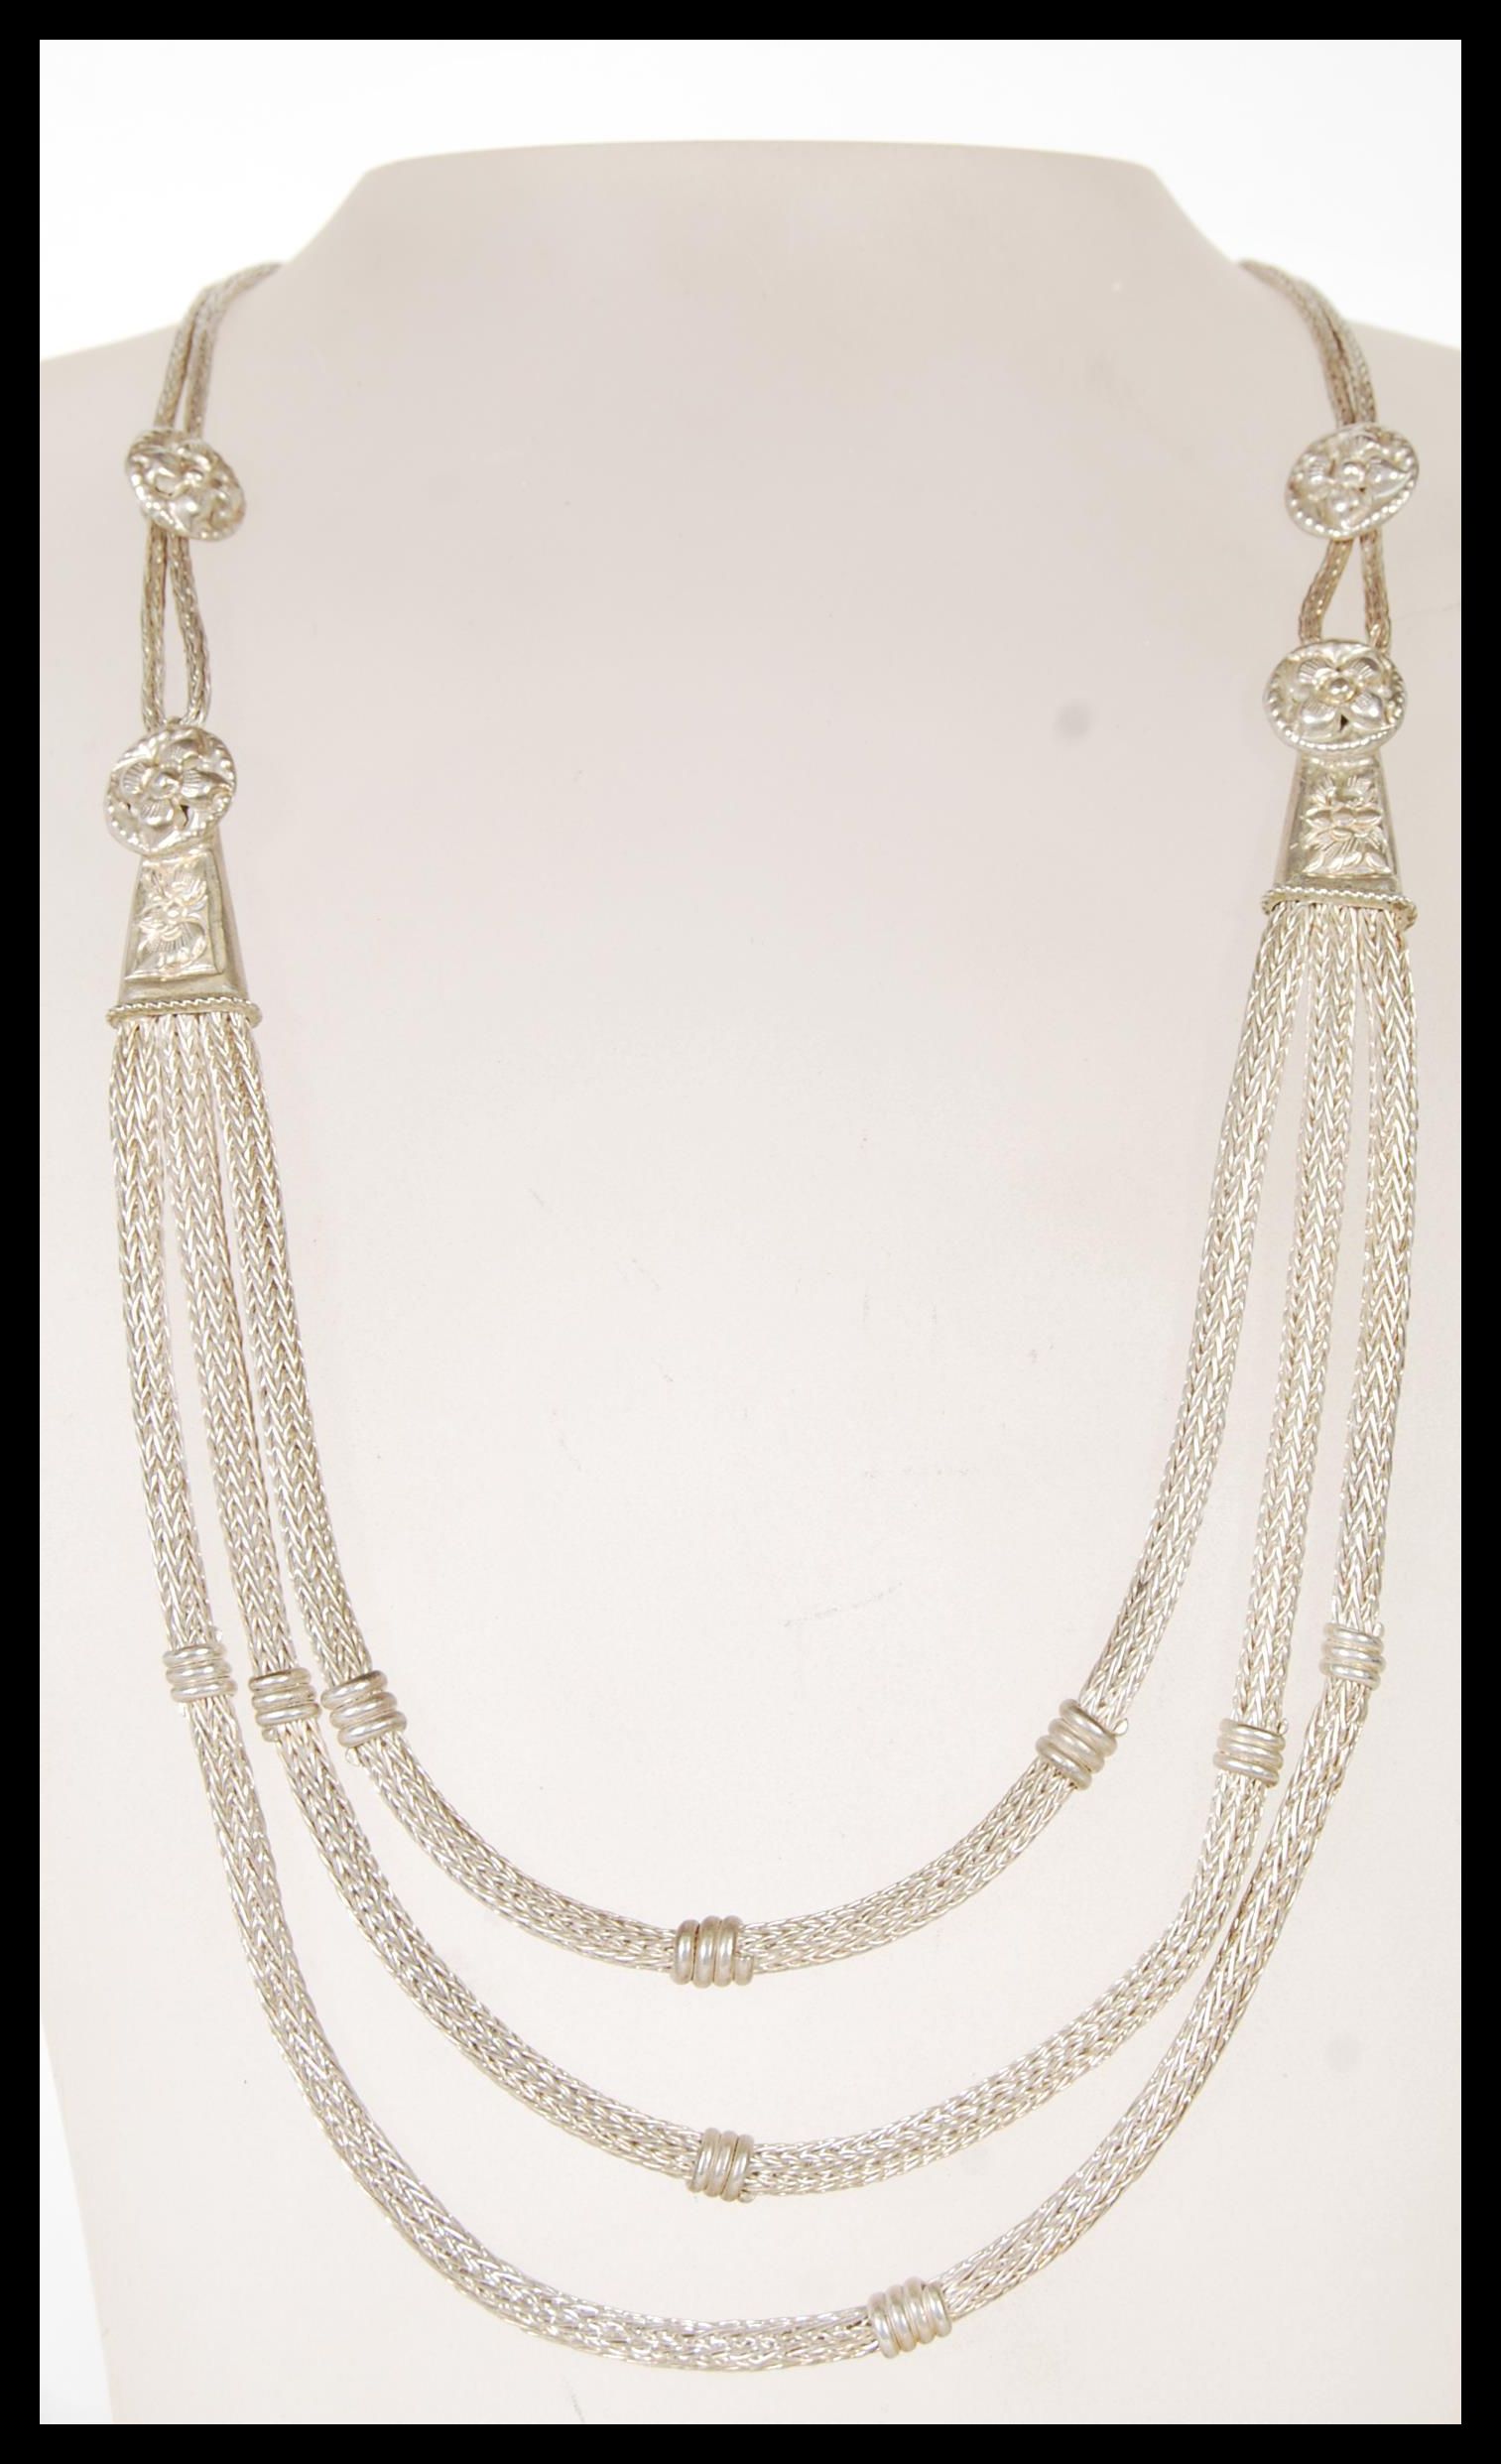 A 20th Century ethnic style silver necklace having three graduating snake chains with engraved